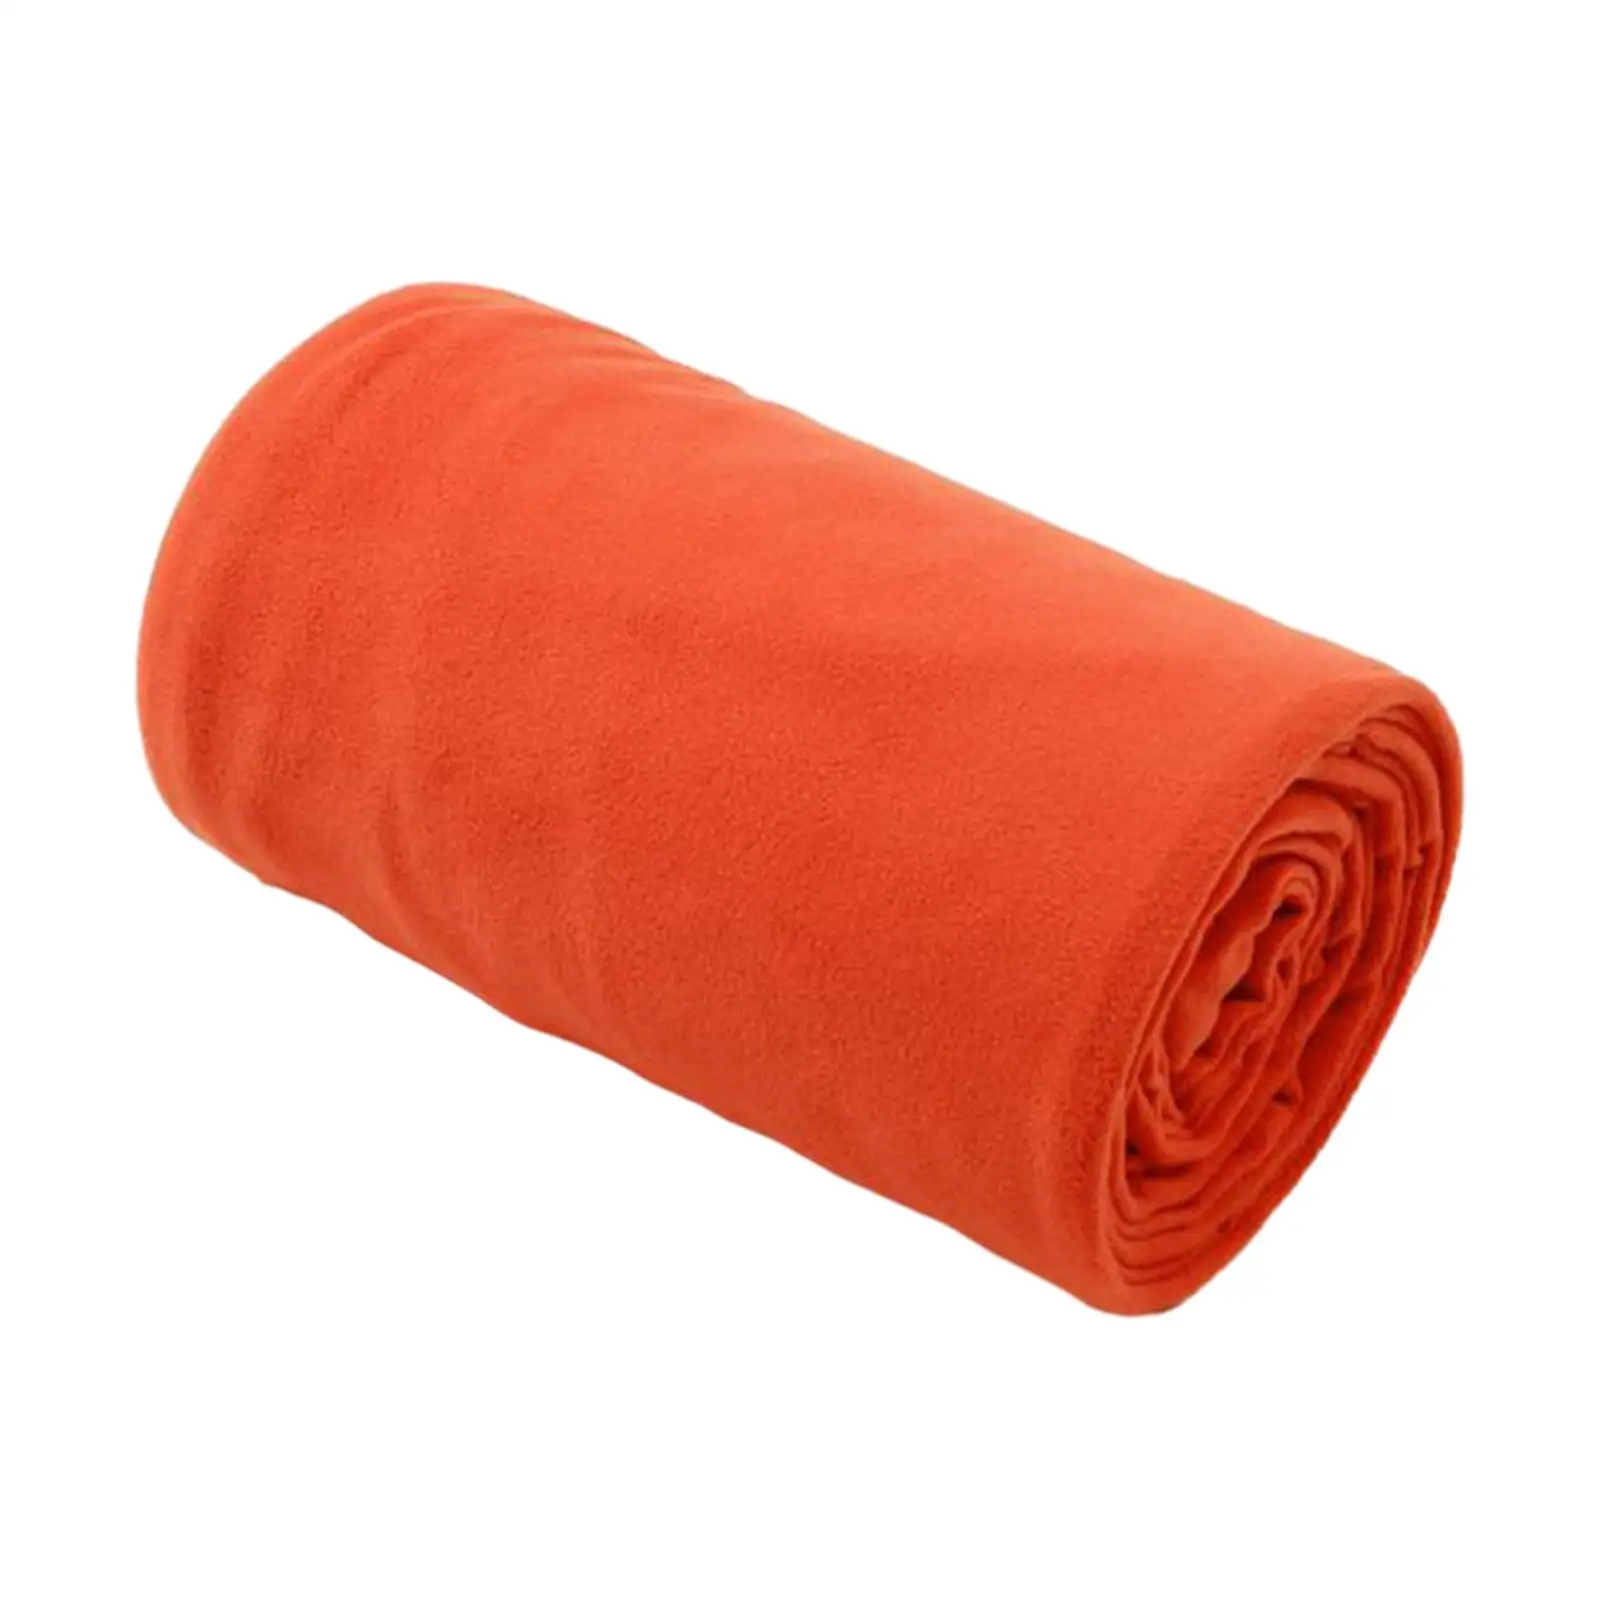 Fleece Sleeping Bag Liner Blanket Liner Ultralight Thickness Portable Thermal Warm Sleeping Bag for Travel Hiking Accessories